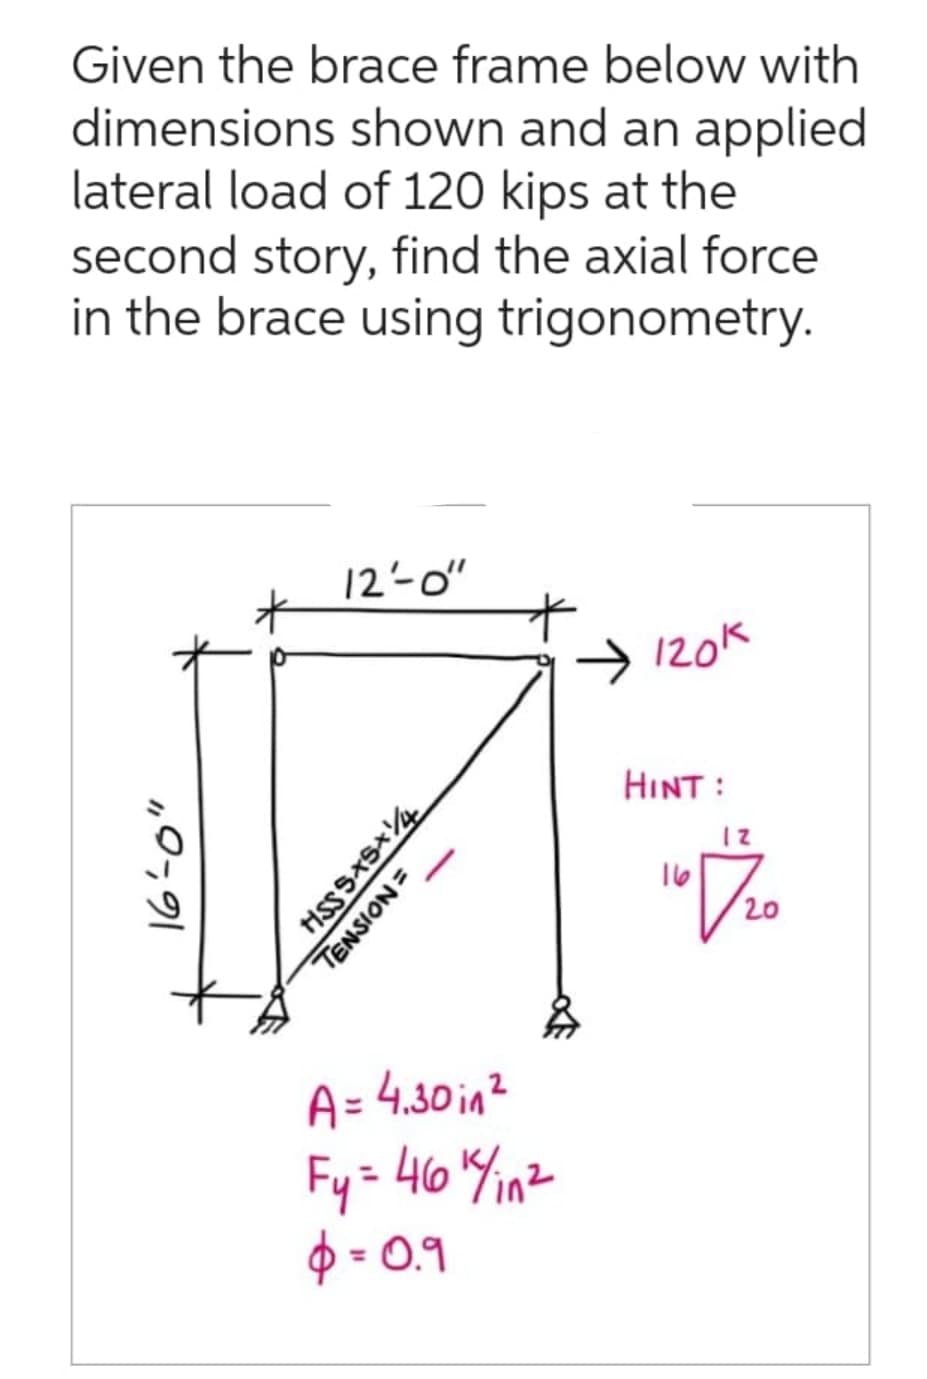 Given the brace frame below with
dimensions shown and an applied
lateral load of 120 kips at the
second story, find the axial force
in the brace using trigonometry.
19-91
E
12-0"
HSS SXSX14
TENSION=
A = 4.30in²
Fy = 46 ¹4 in ²
$ = 0.9
→ 120k
HINT :
167/20